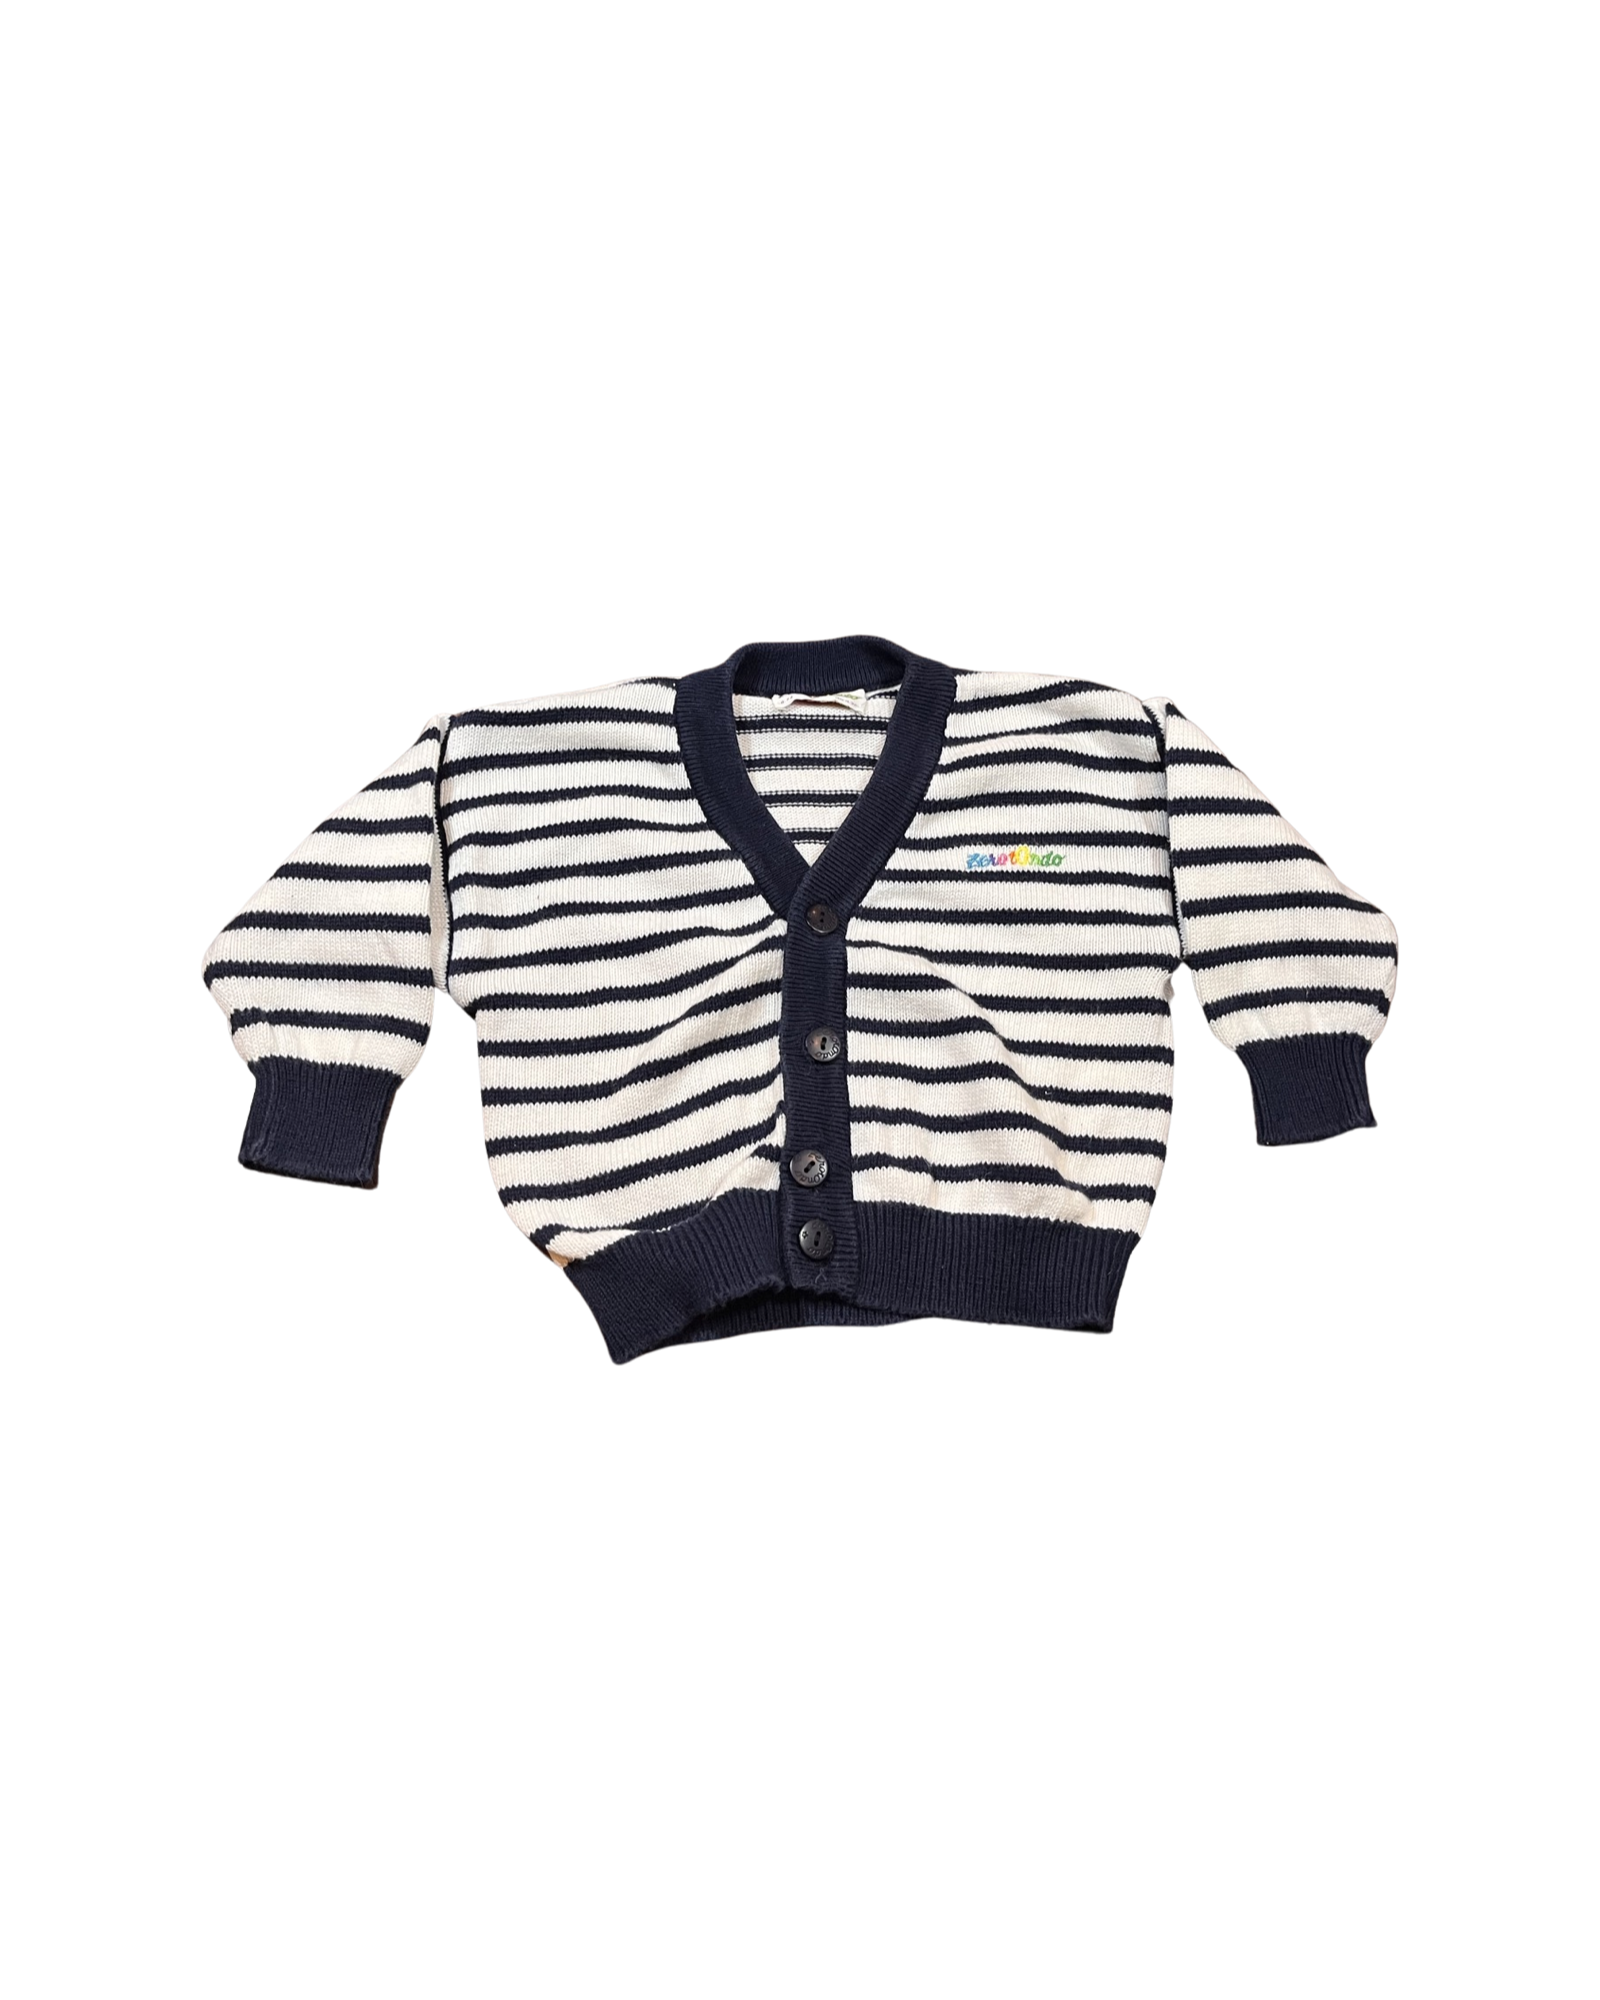 Zerot Ondo Blue and White Striped Knit Sweater (12M)